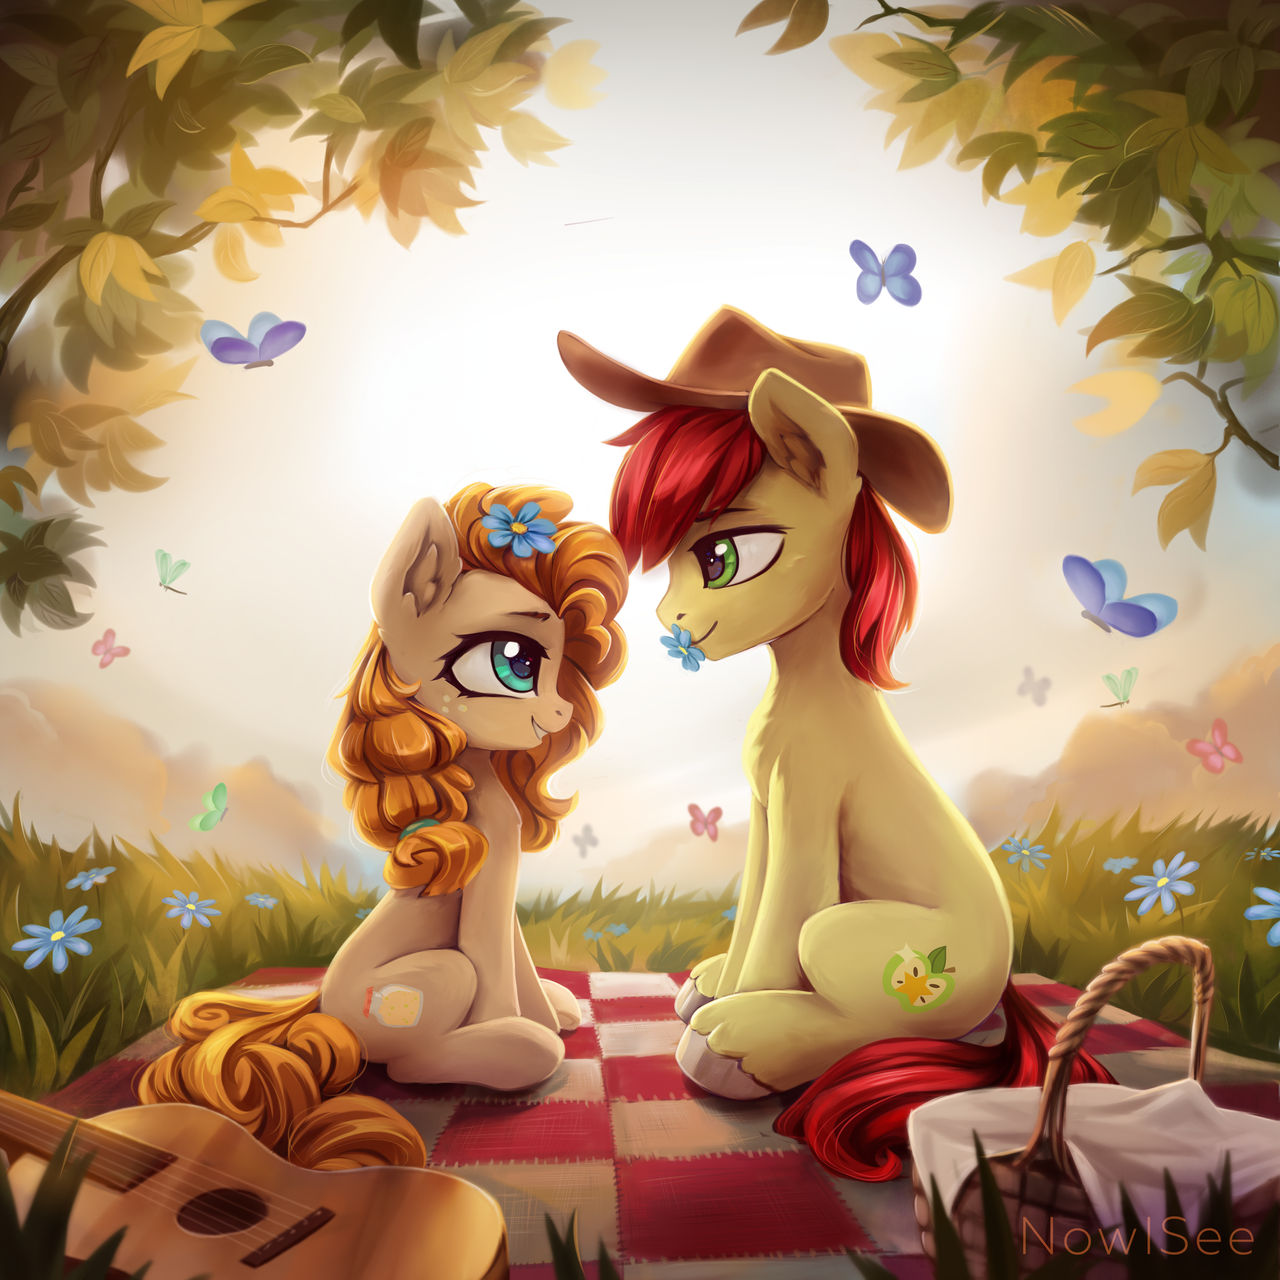 [Obrázek: pear_butter_and_bright_mac_by_inowiseei_...llview.jpg]